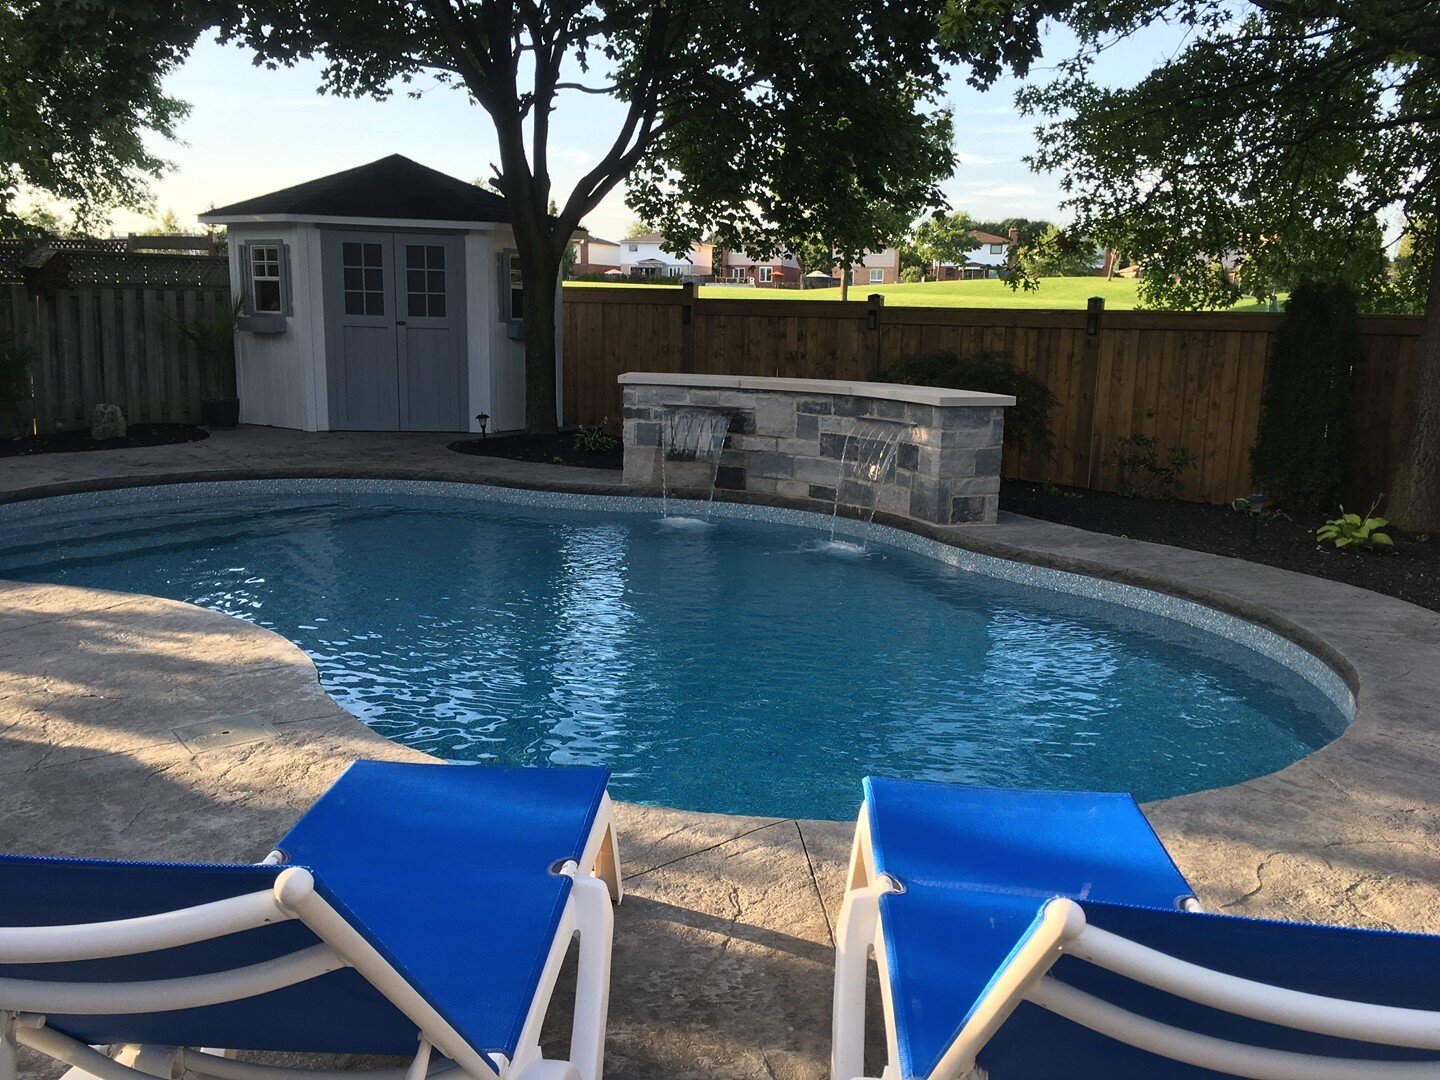 As long as we are in heat wave, we will keep posting our past backyard projects. #onlyfitting 😃

Project collab.  with Exterior Pools. 

#backyardoasis #poolparty #concreteconstruction #concretedesign #hamont #summervibes #brantford #burlington